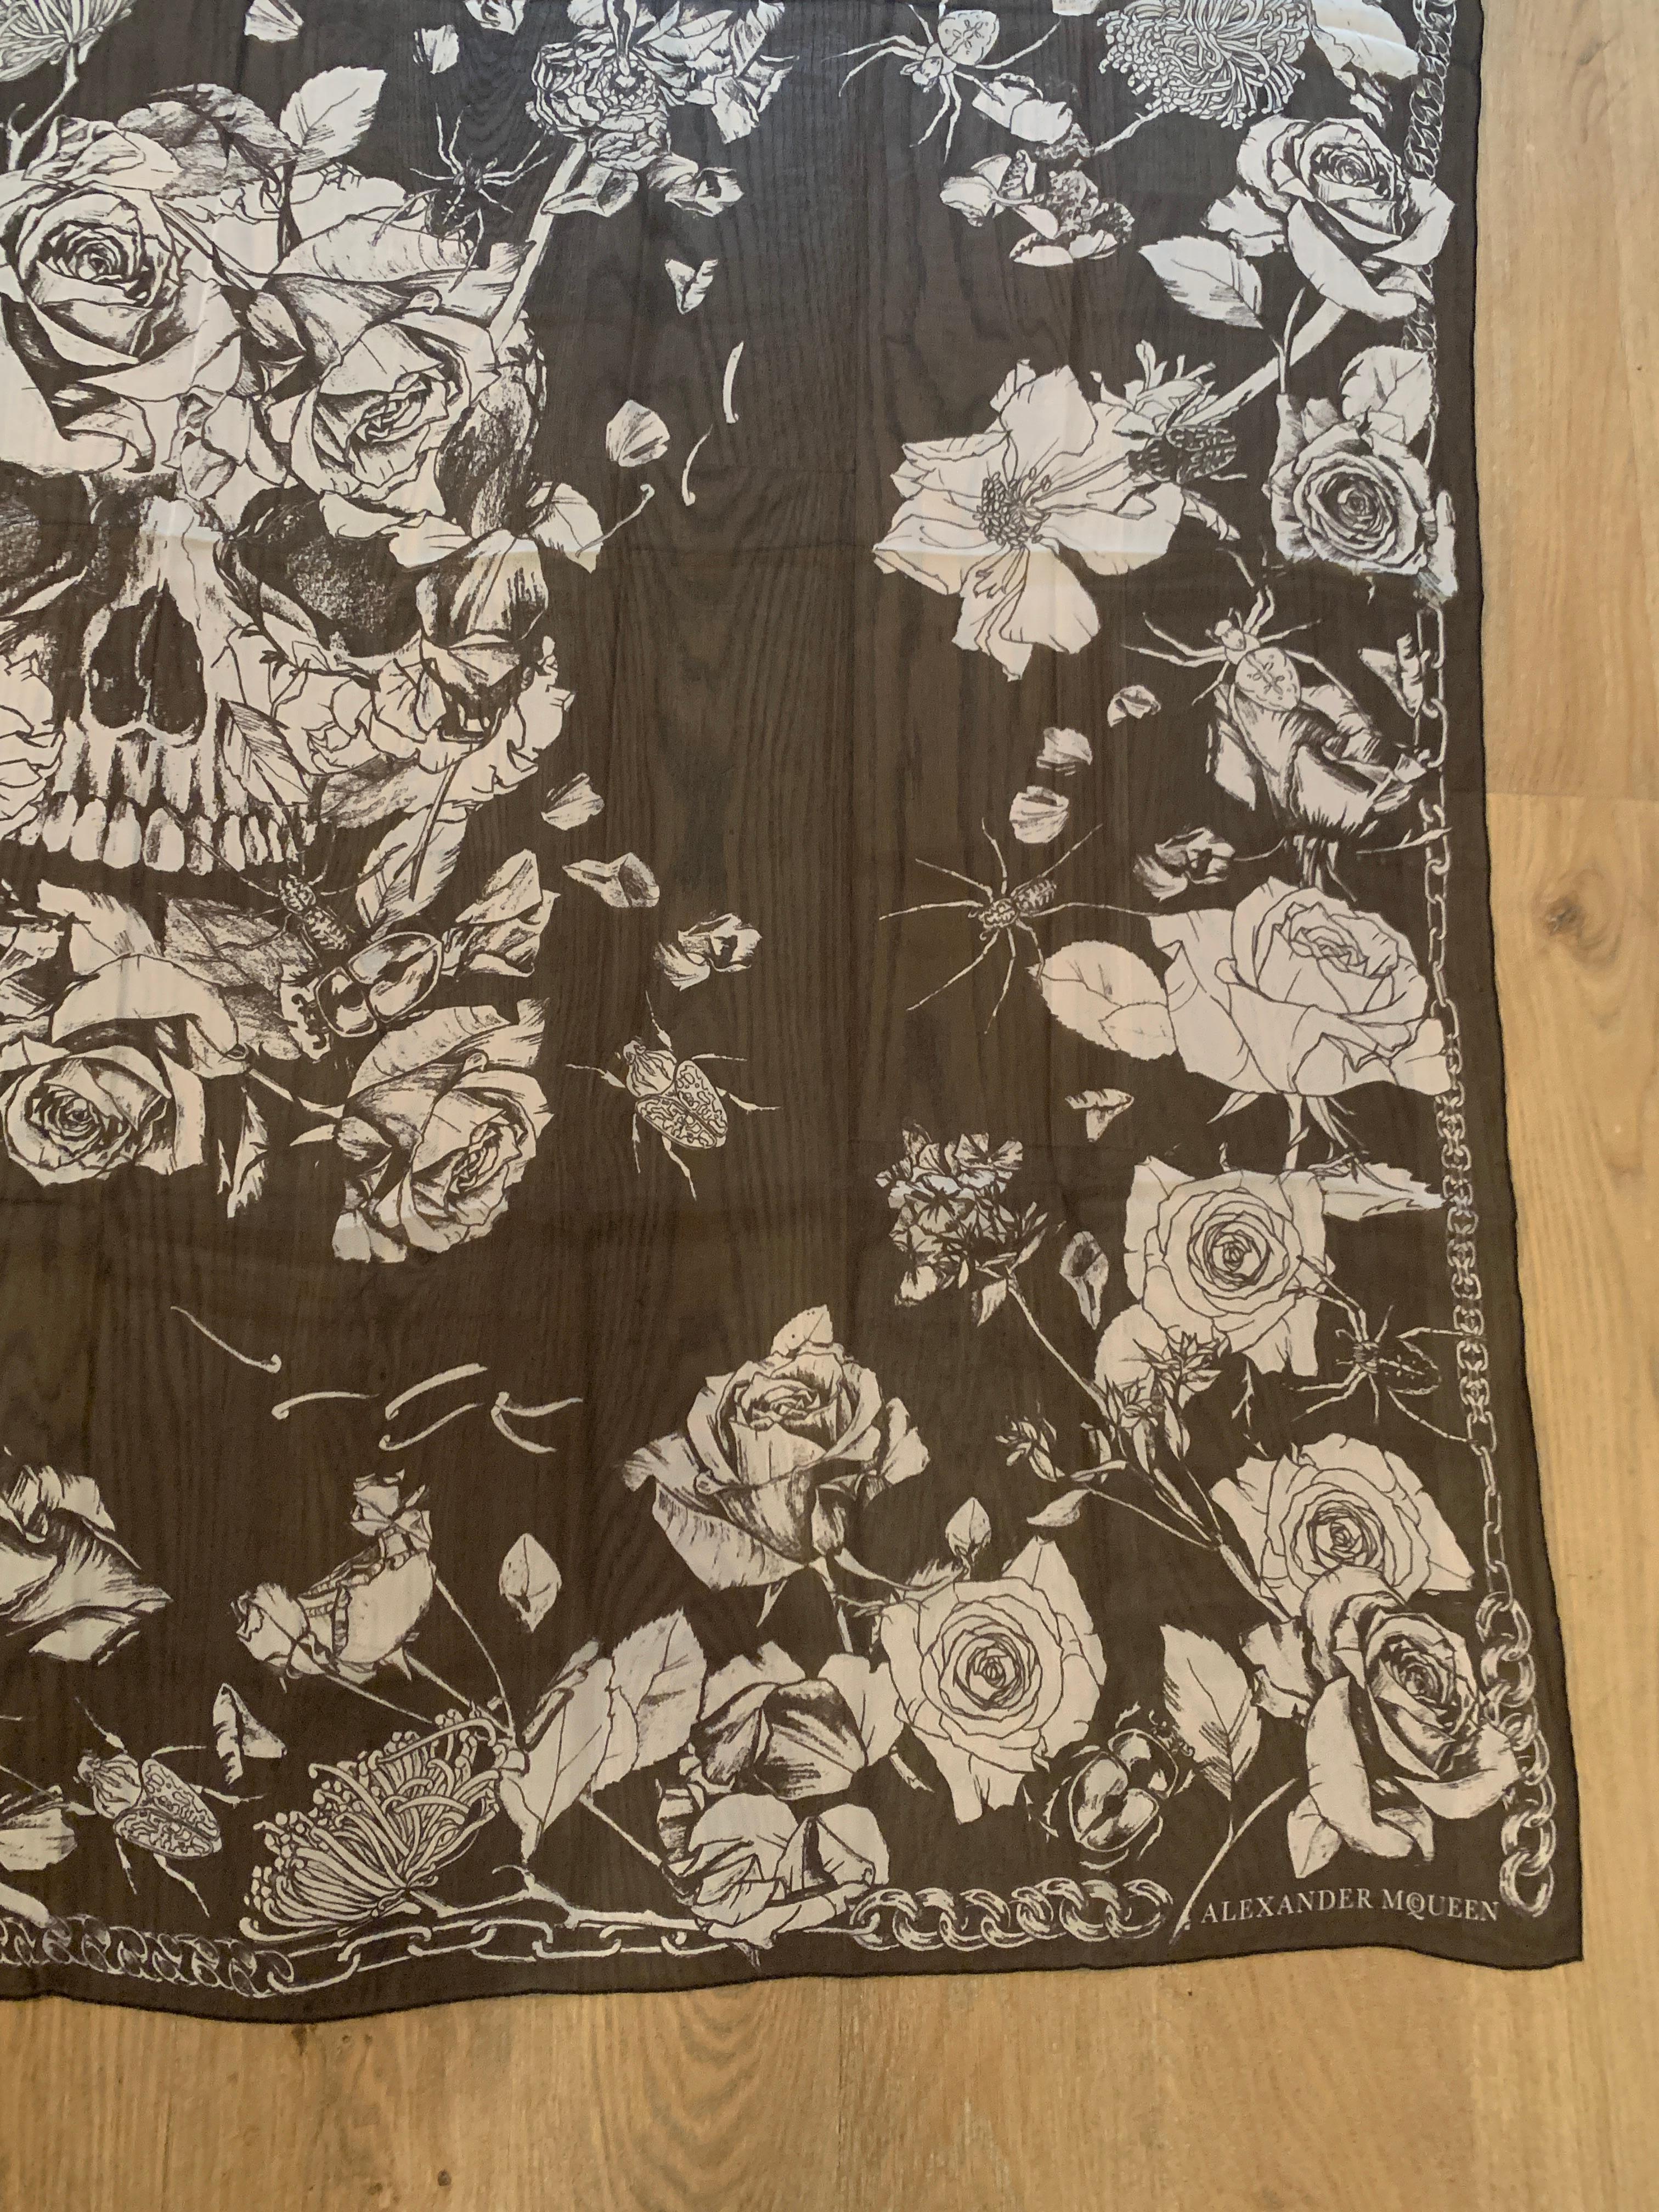 Huge New Alexander Mcqueen Silk Skull, Roses and Insect Semi-Sheer Black Scarf  2